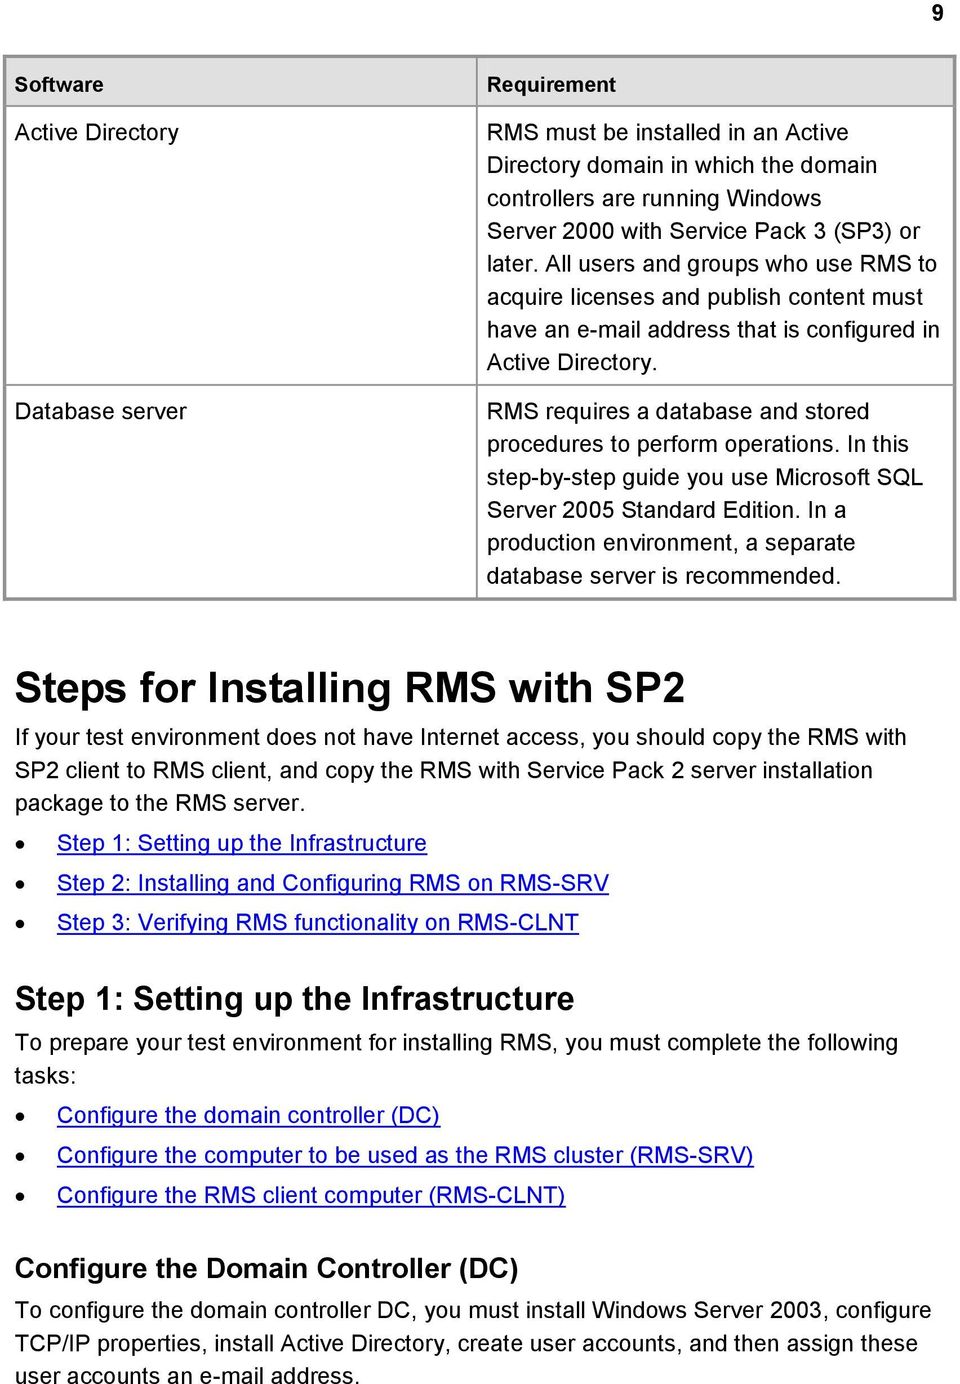 RMS requires a database and stored procedures to perform operations. In this step-by-step guide you use Microsoft SQL Server 2005 Standard Edition.